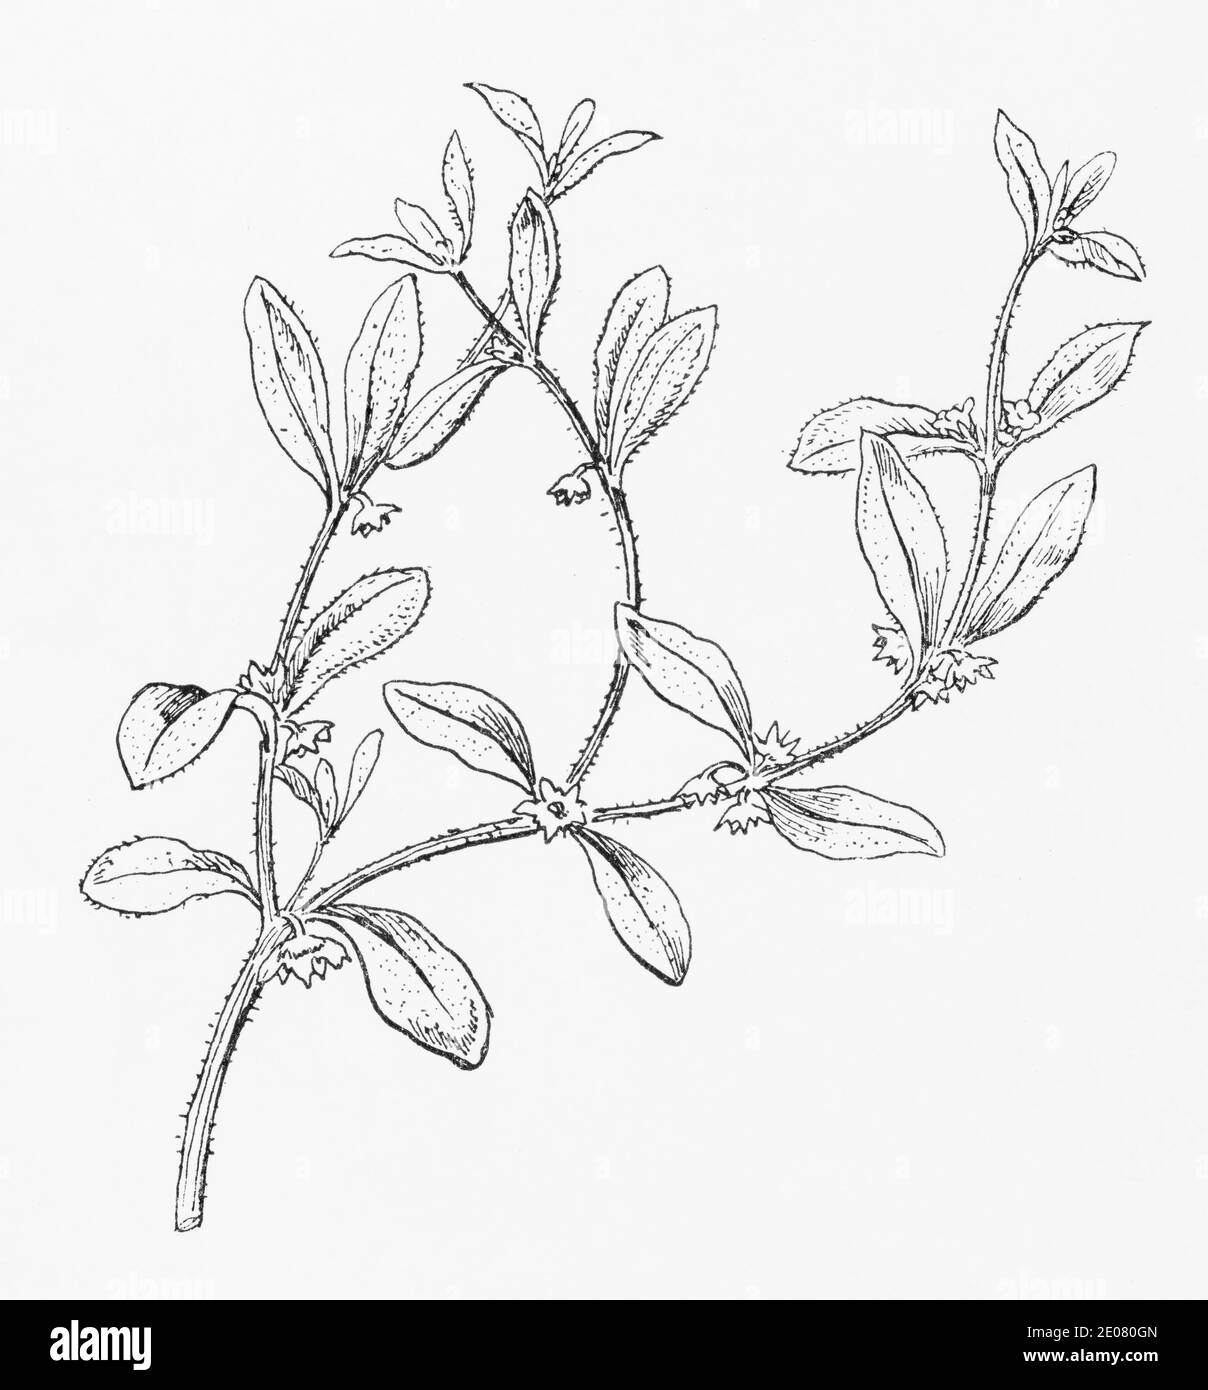 Old botanical illustration engraving of Madwort / Asperugo procumbens.  Traditional medicinal herbal plant in some parts of world. See Notes Stock Photo